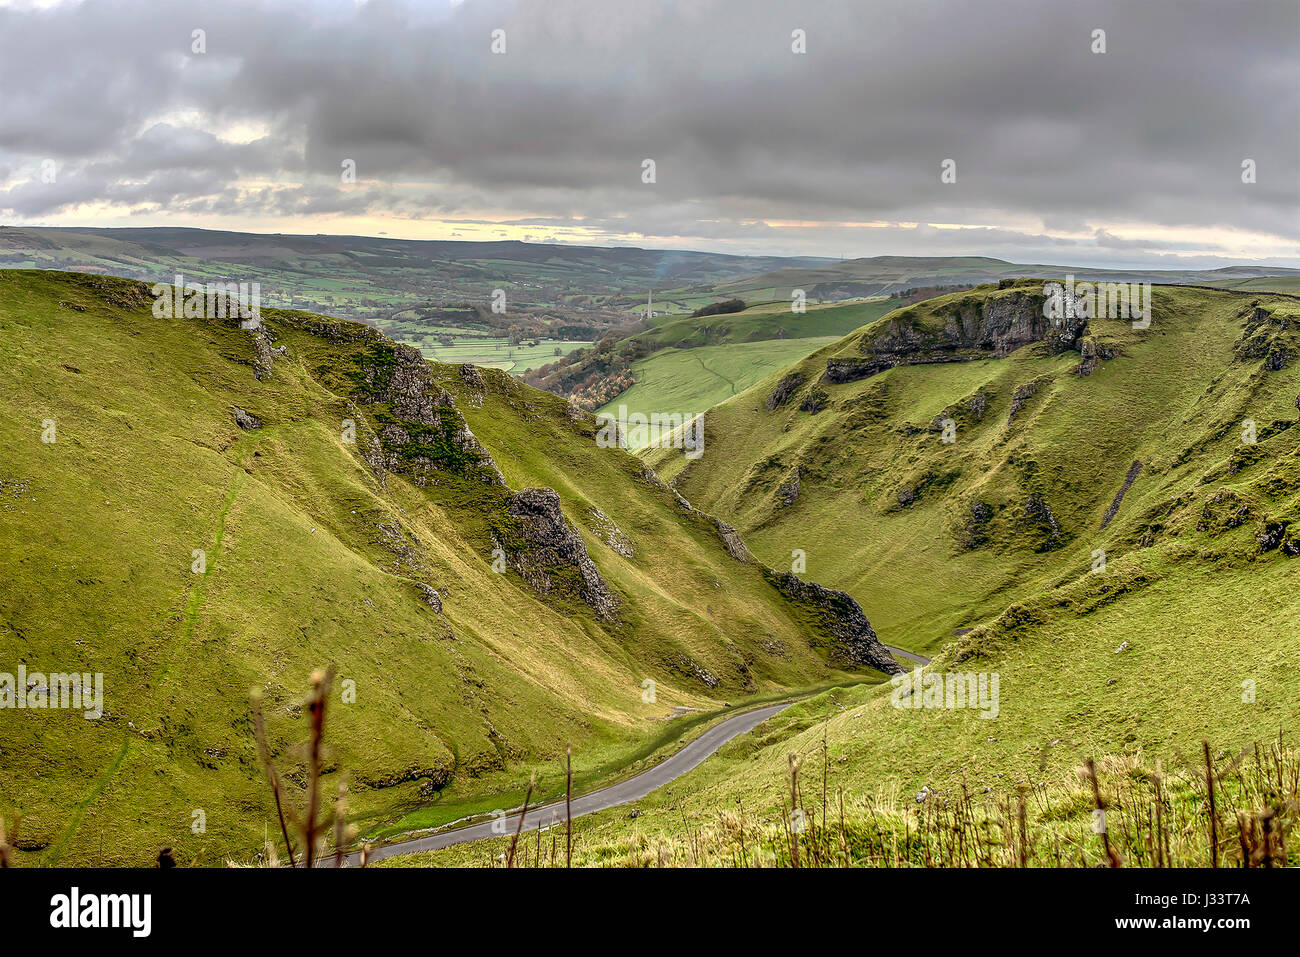 View from the top, mountainous landscape Stock Photo